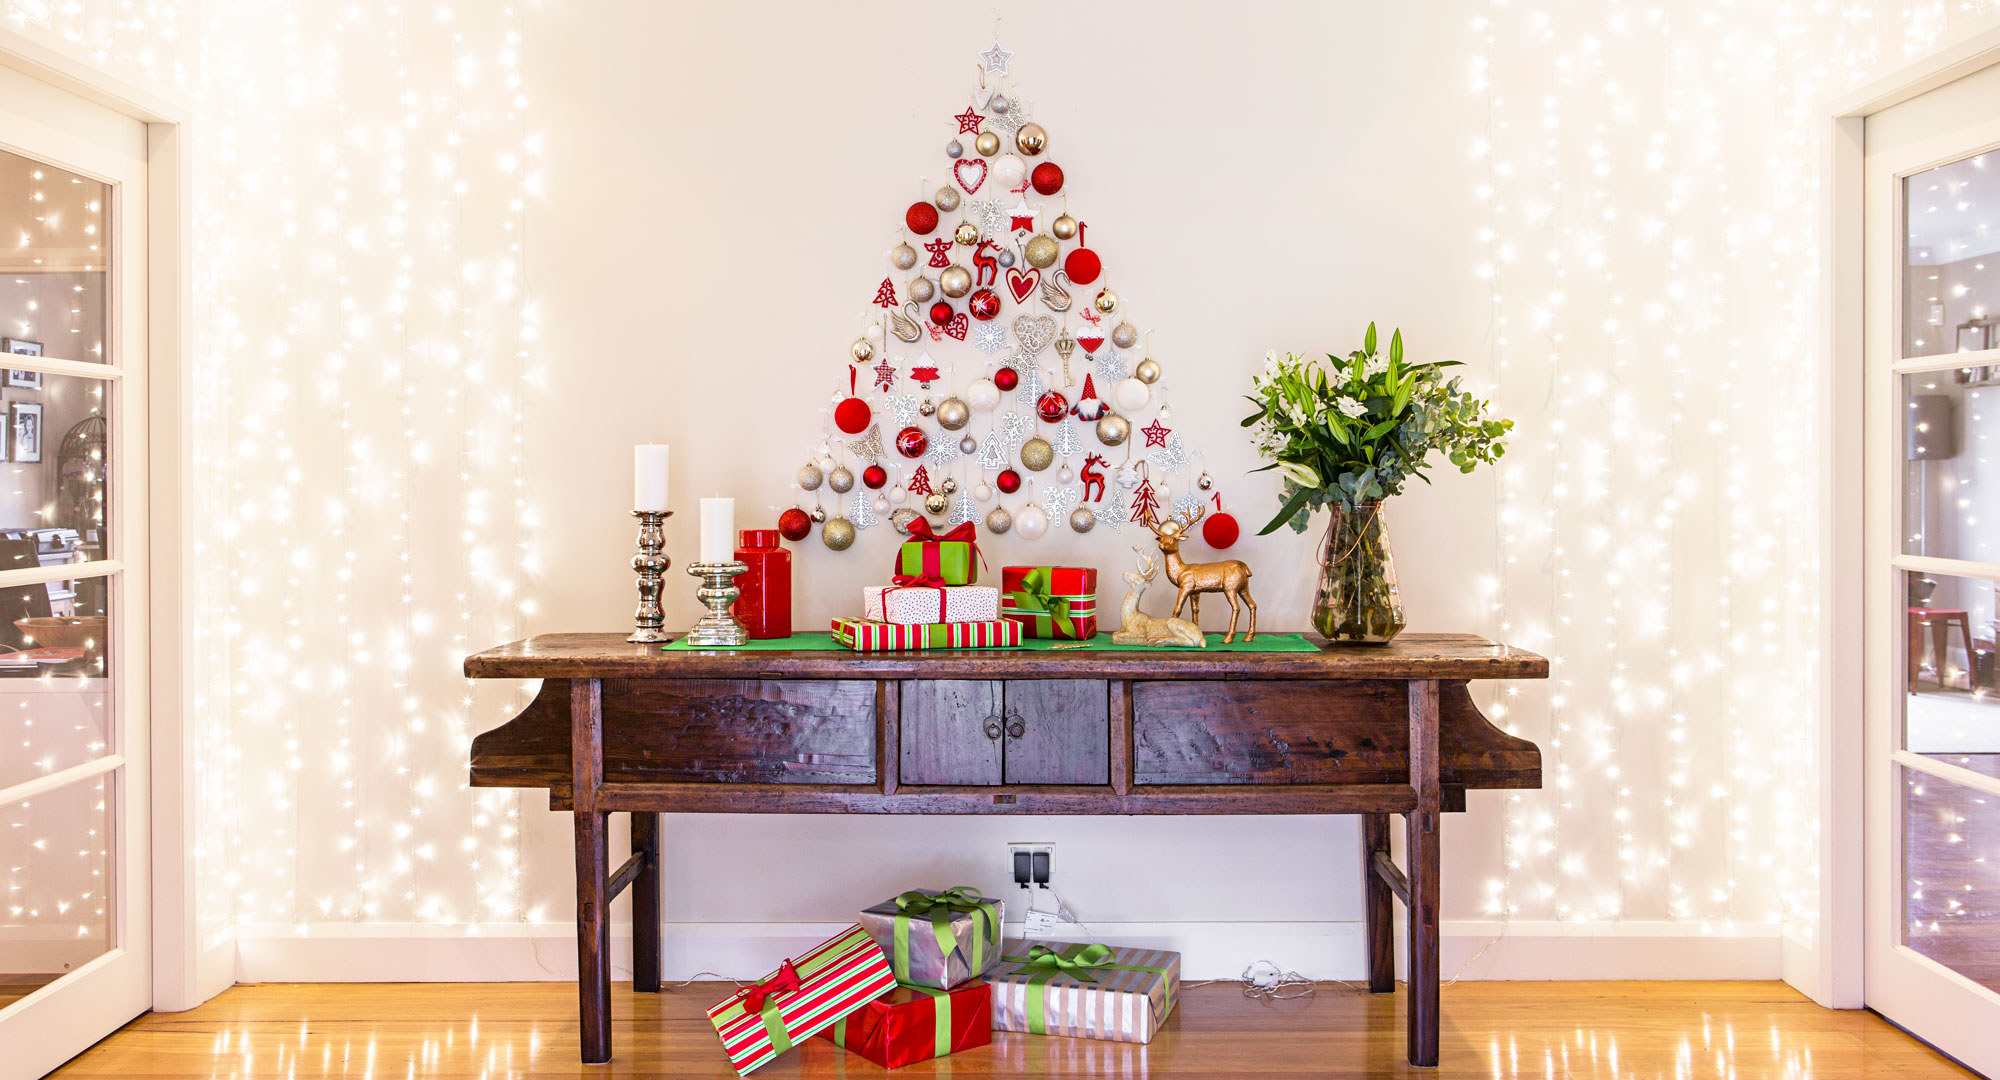 How to make a wall Christmas tree | Better Homes and Gardens